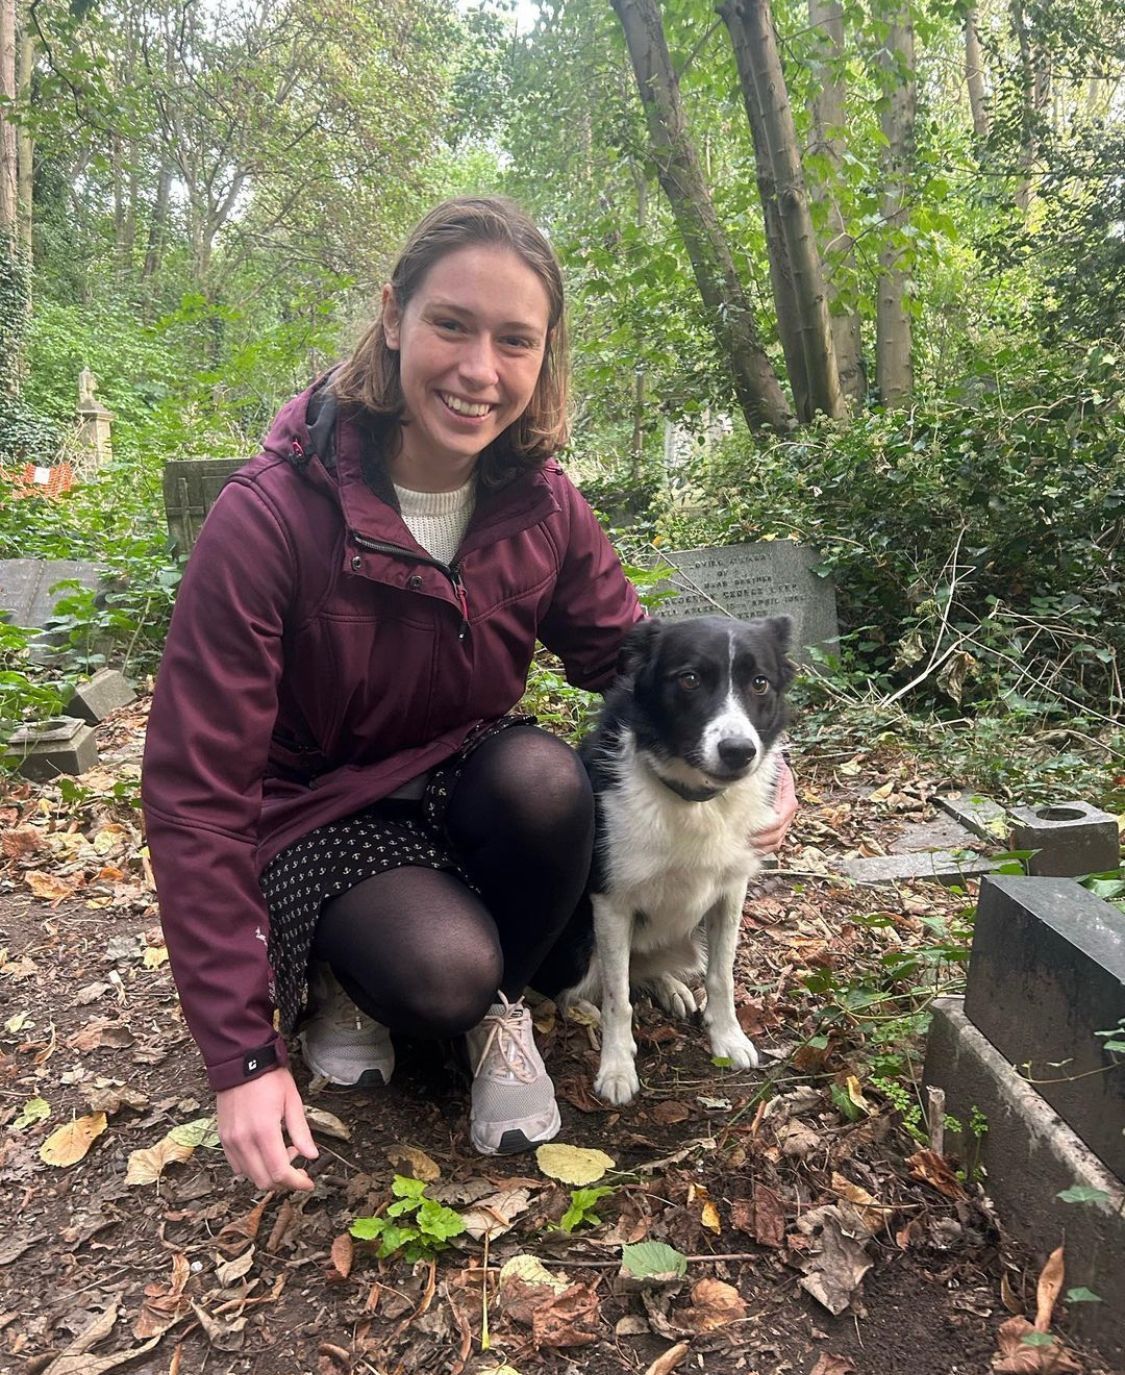 Gemma and Reef, Abney Park. They are part of the campaign for dogs to stay off the lead in Abney Park. Photo: Abney Dog of the Day